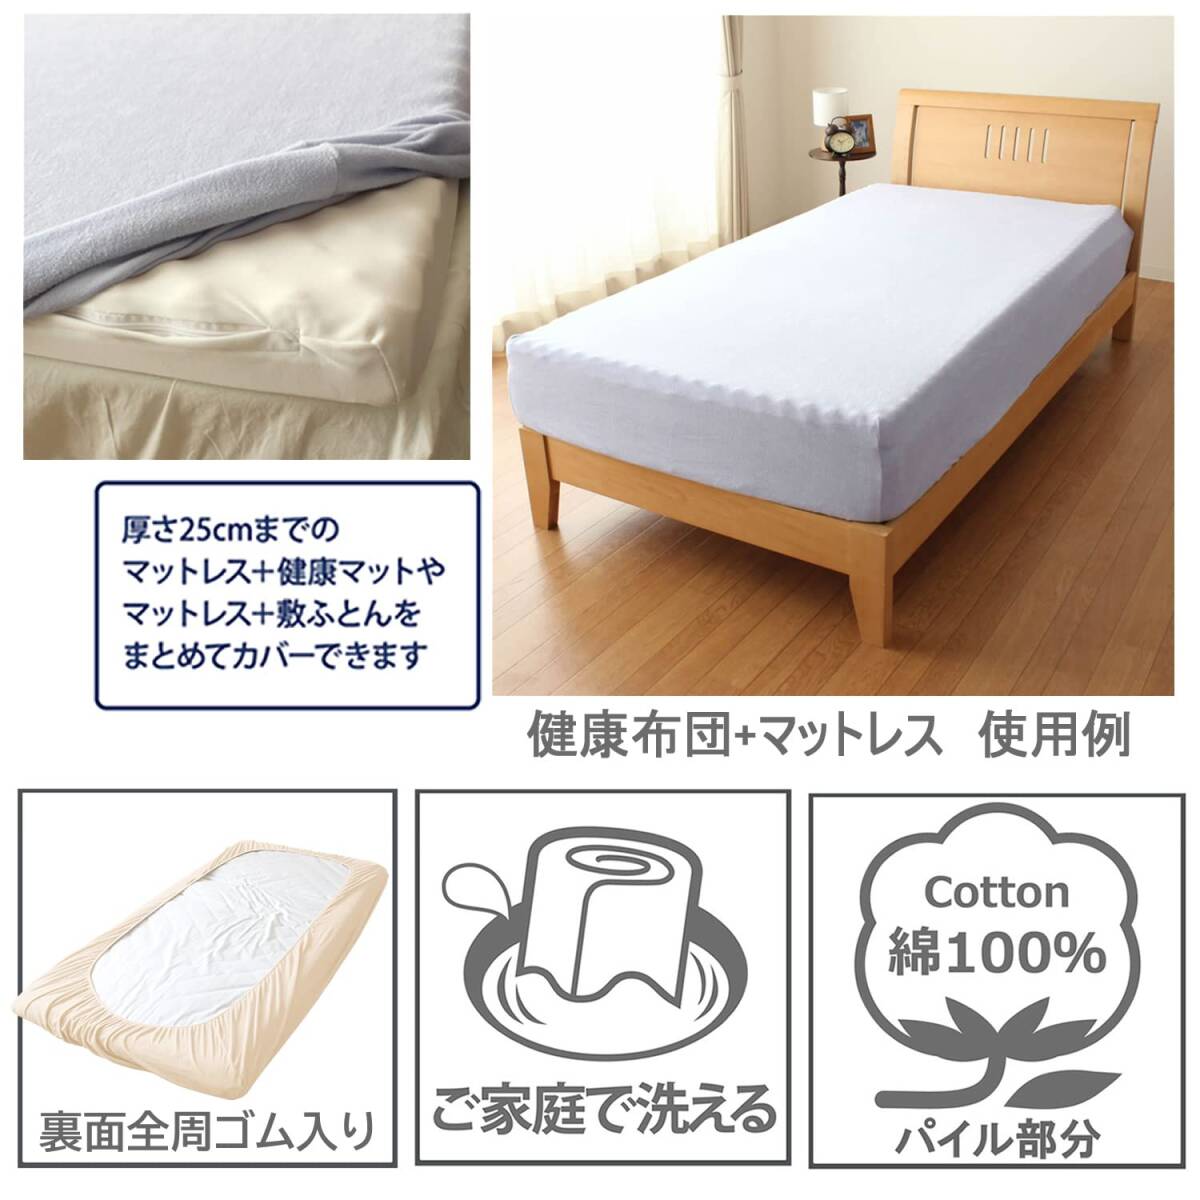 me Lee Night sheet extension extension precisely pie ru sheet ivory single mattress *. futon combined use type stretch material wrinkle no pita